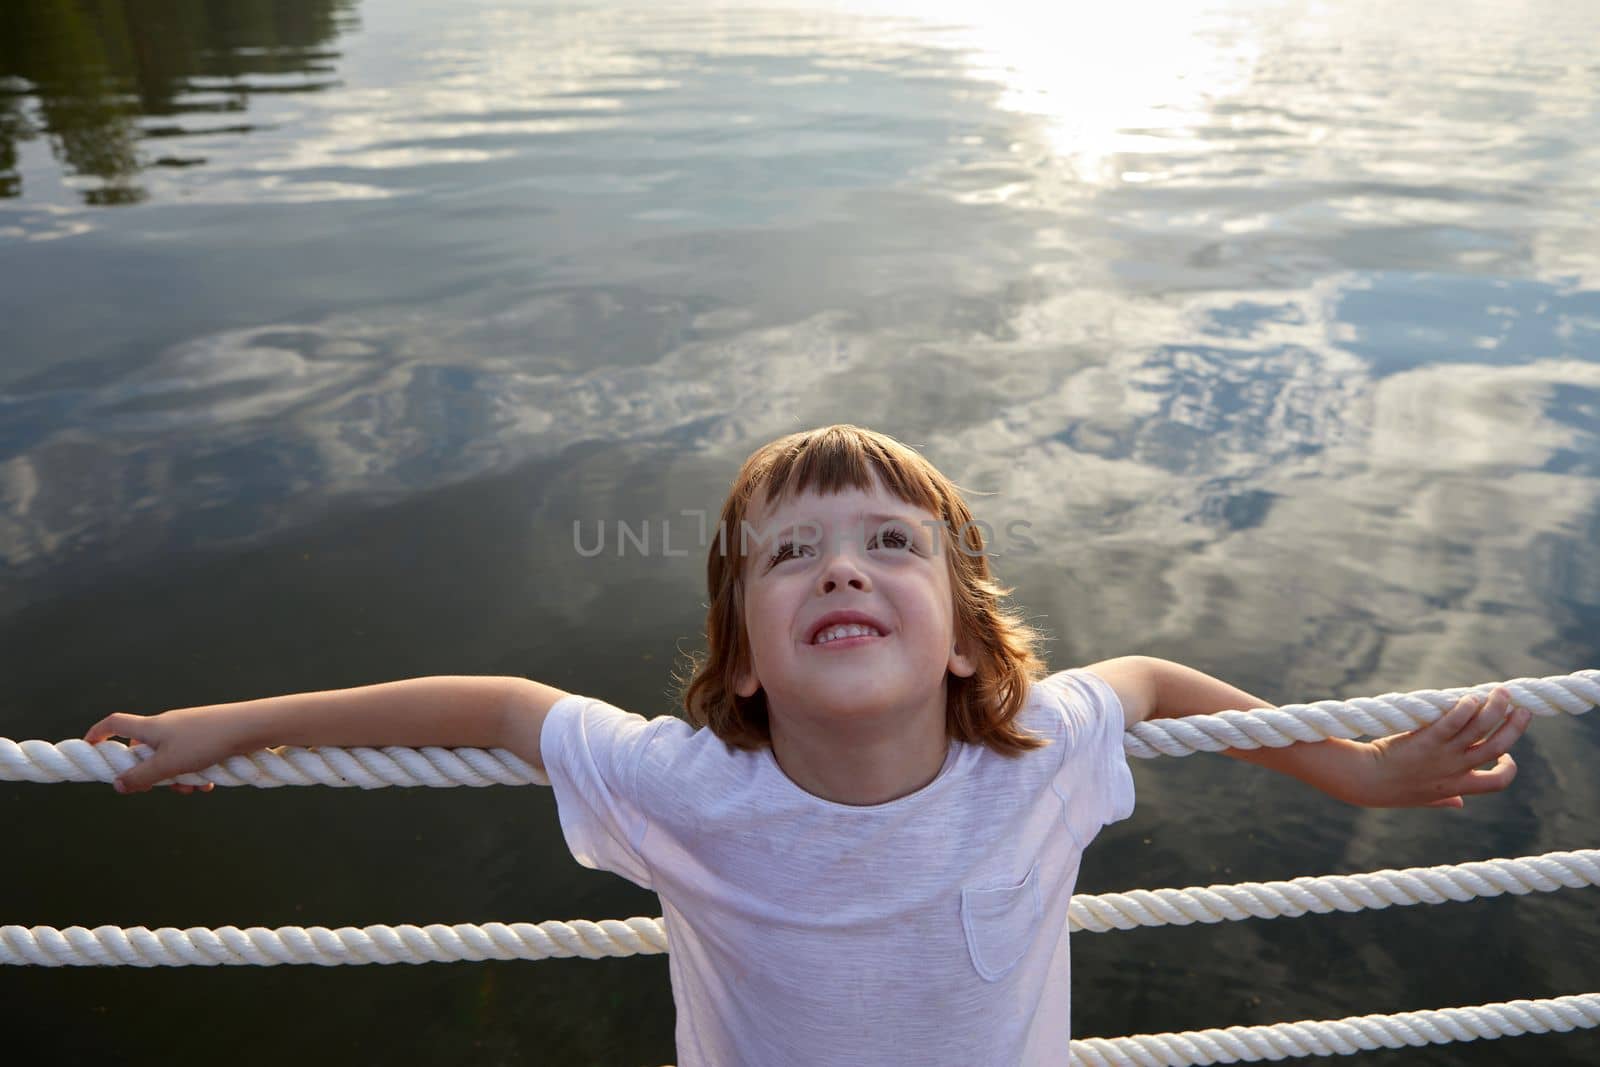 Boy leaning on ropes near lake water by Demkat